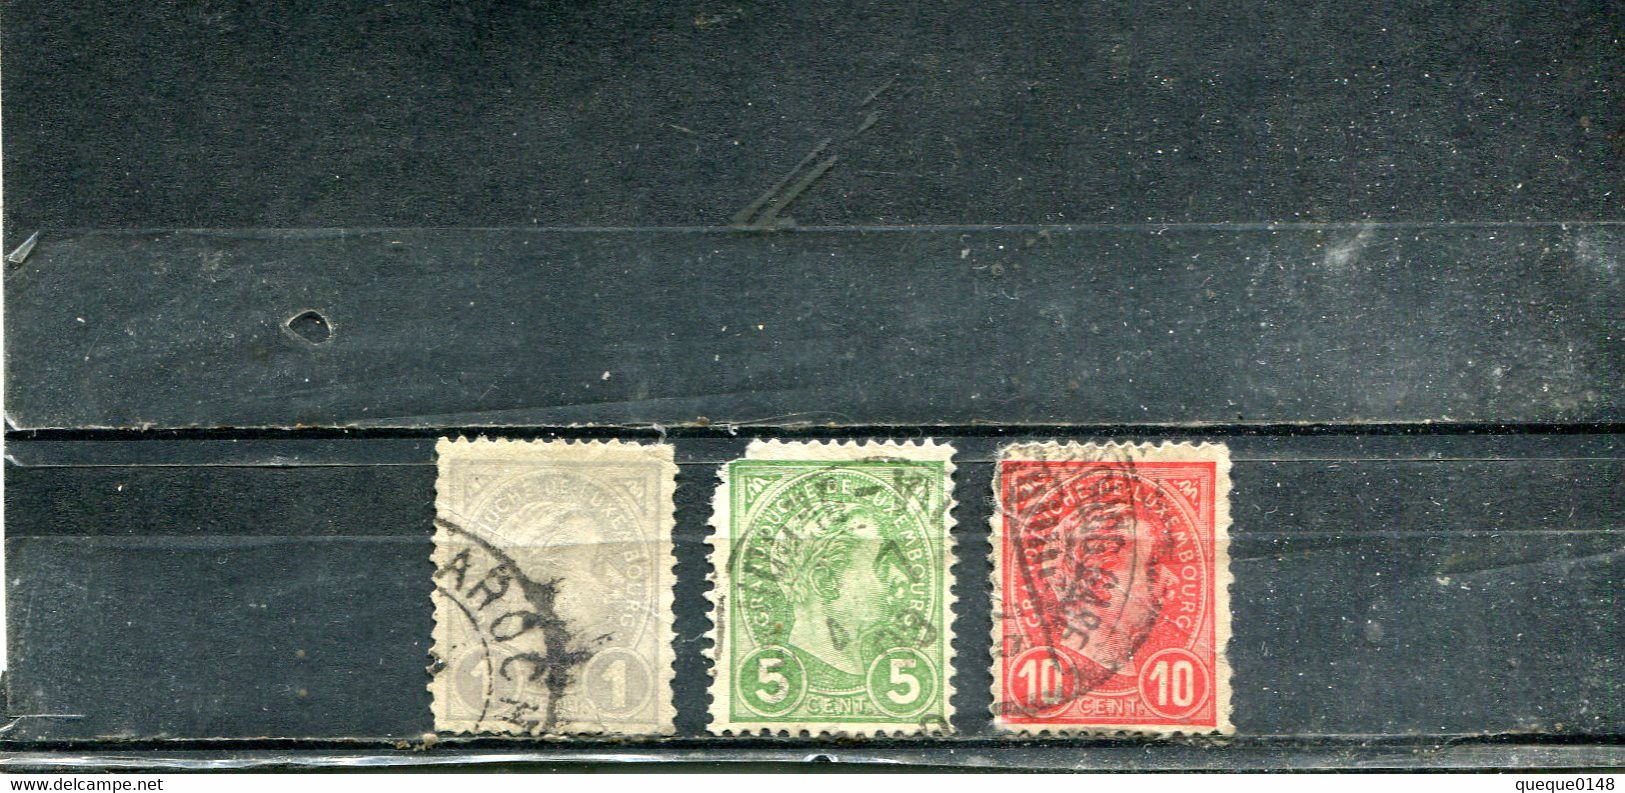 Luxembourg 1895 Yt 69 72-73 Grand-duc Adolphe Ier De Profil - 1895 Adolphe Right-hand Side